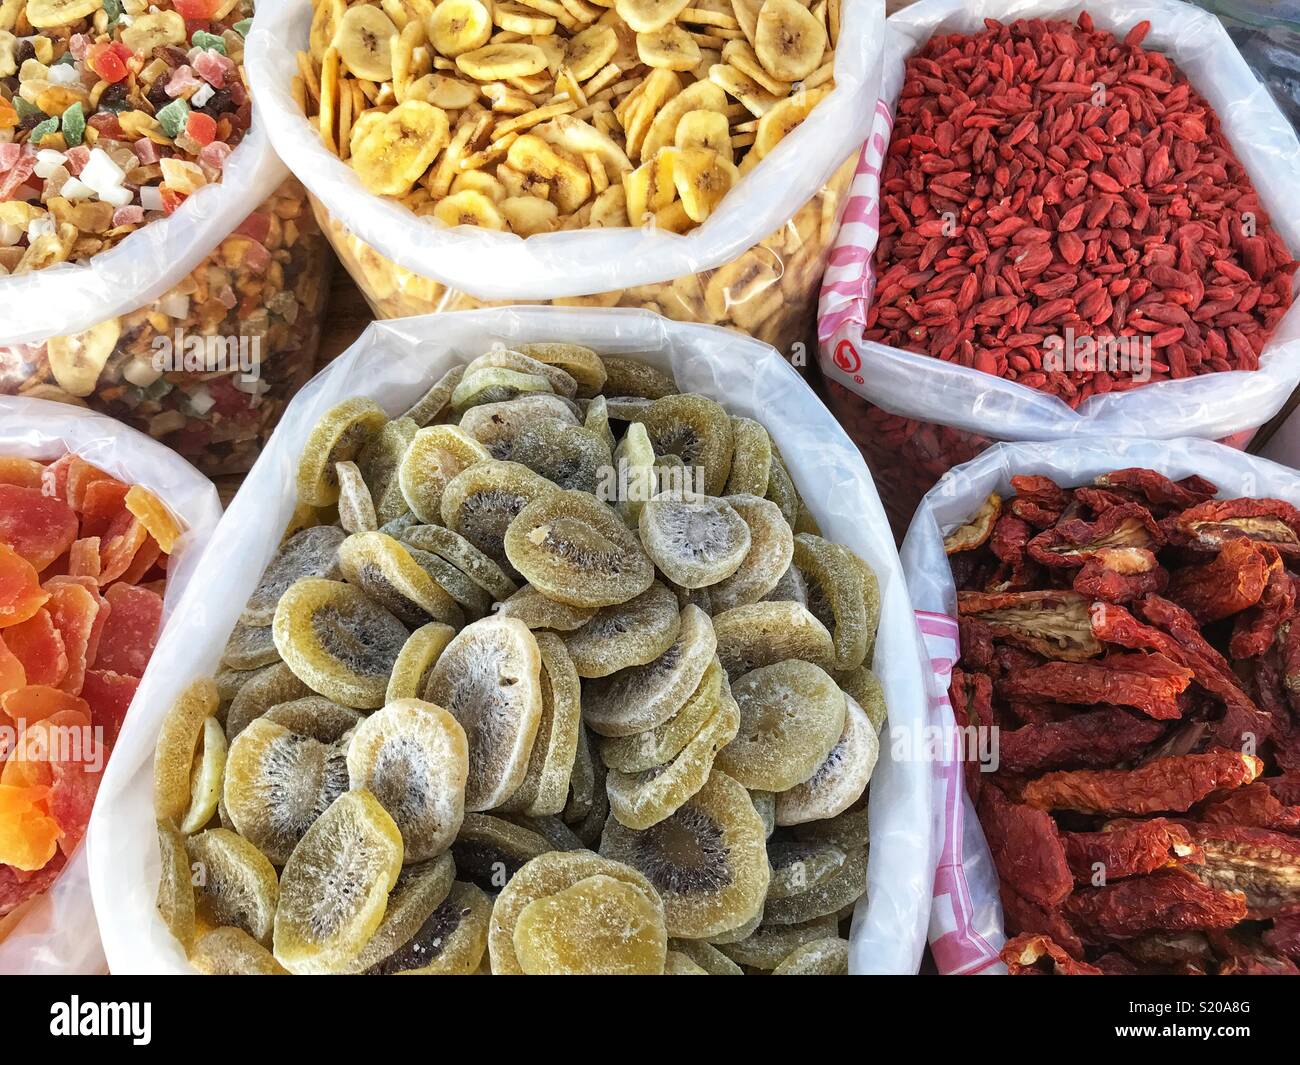 Dried fruits stall, including goji berries, sun dried tomatoes, kiwi fruit, bananas, and papaya, at an outdoor market in Javea, Spain. Stock Photo